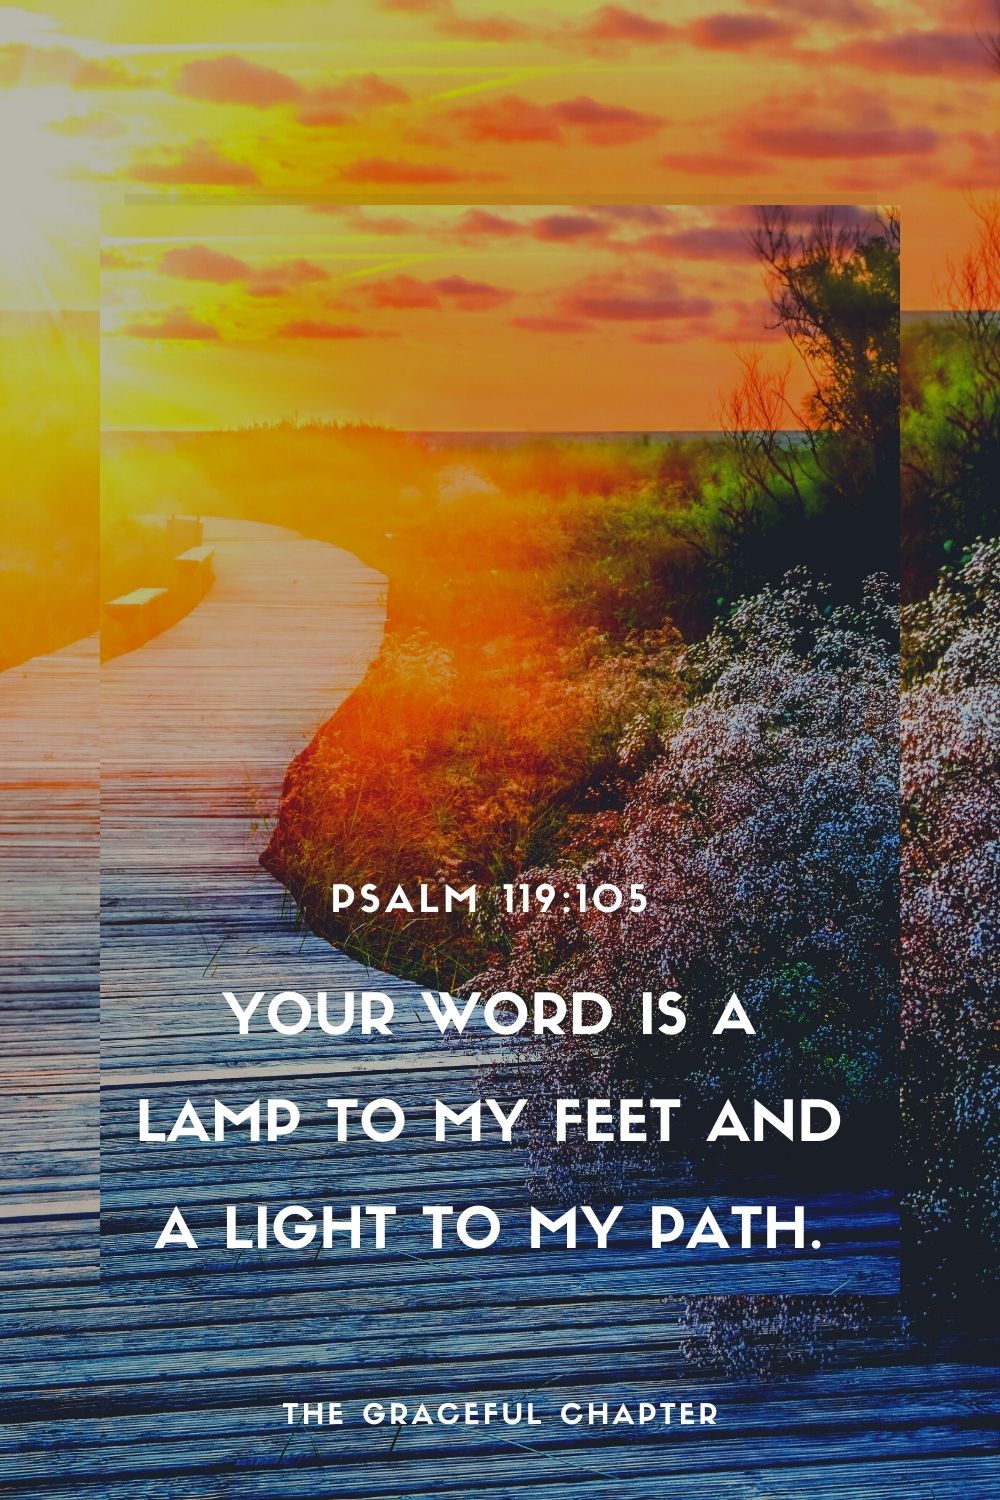 Your word is a lamp to my feet And a light to my path. Psalm 119:105